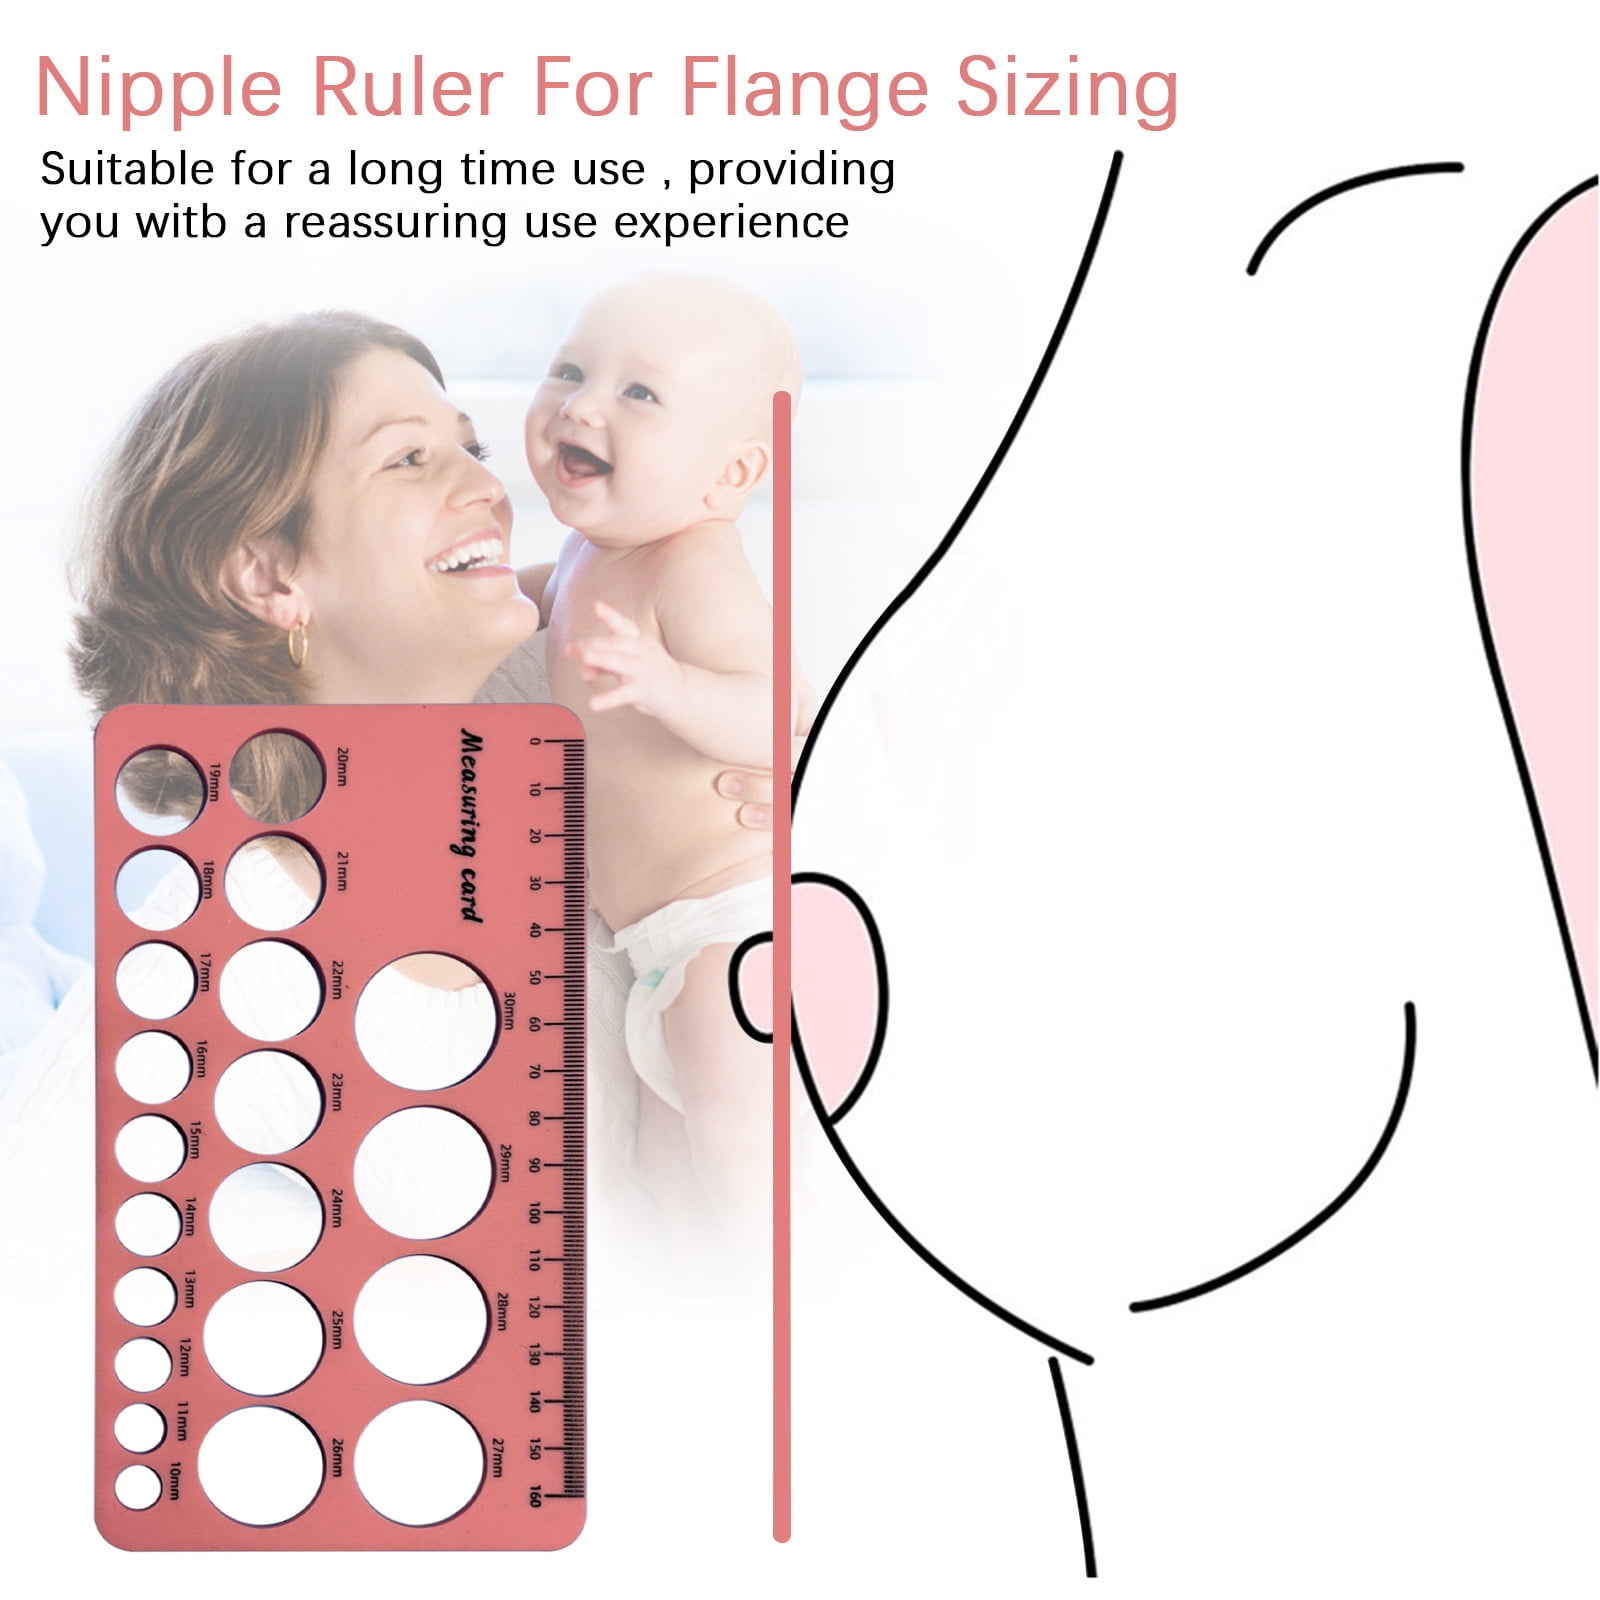 Nipple Ruler, Nipple Measurement Tool for Flanges, Silicone and